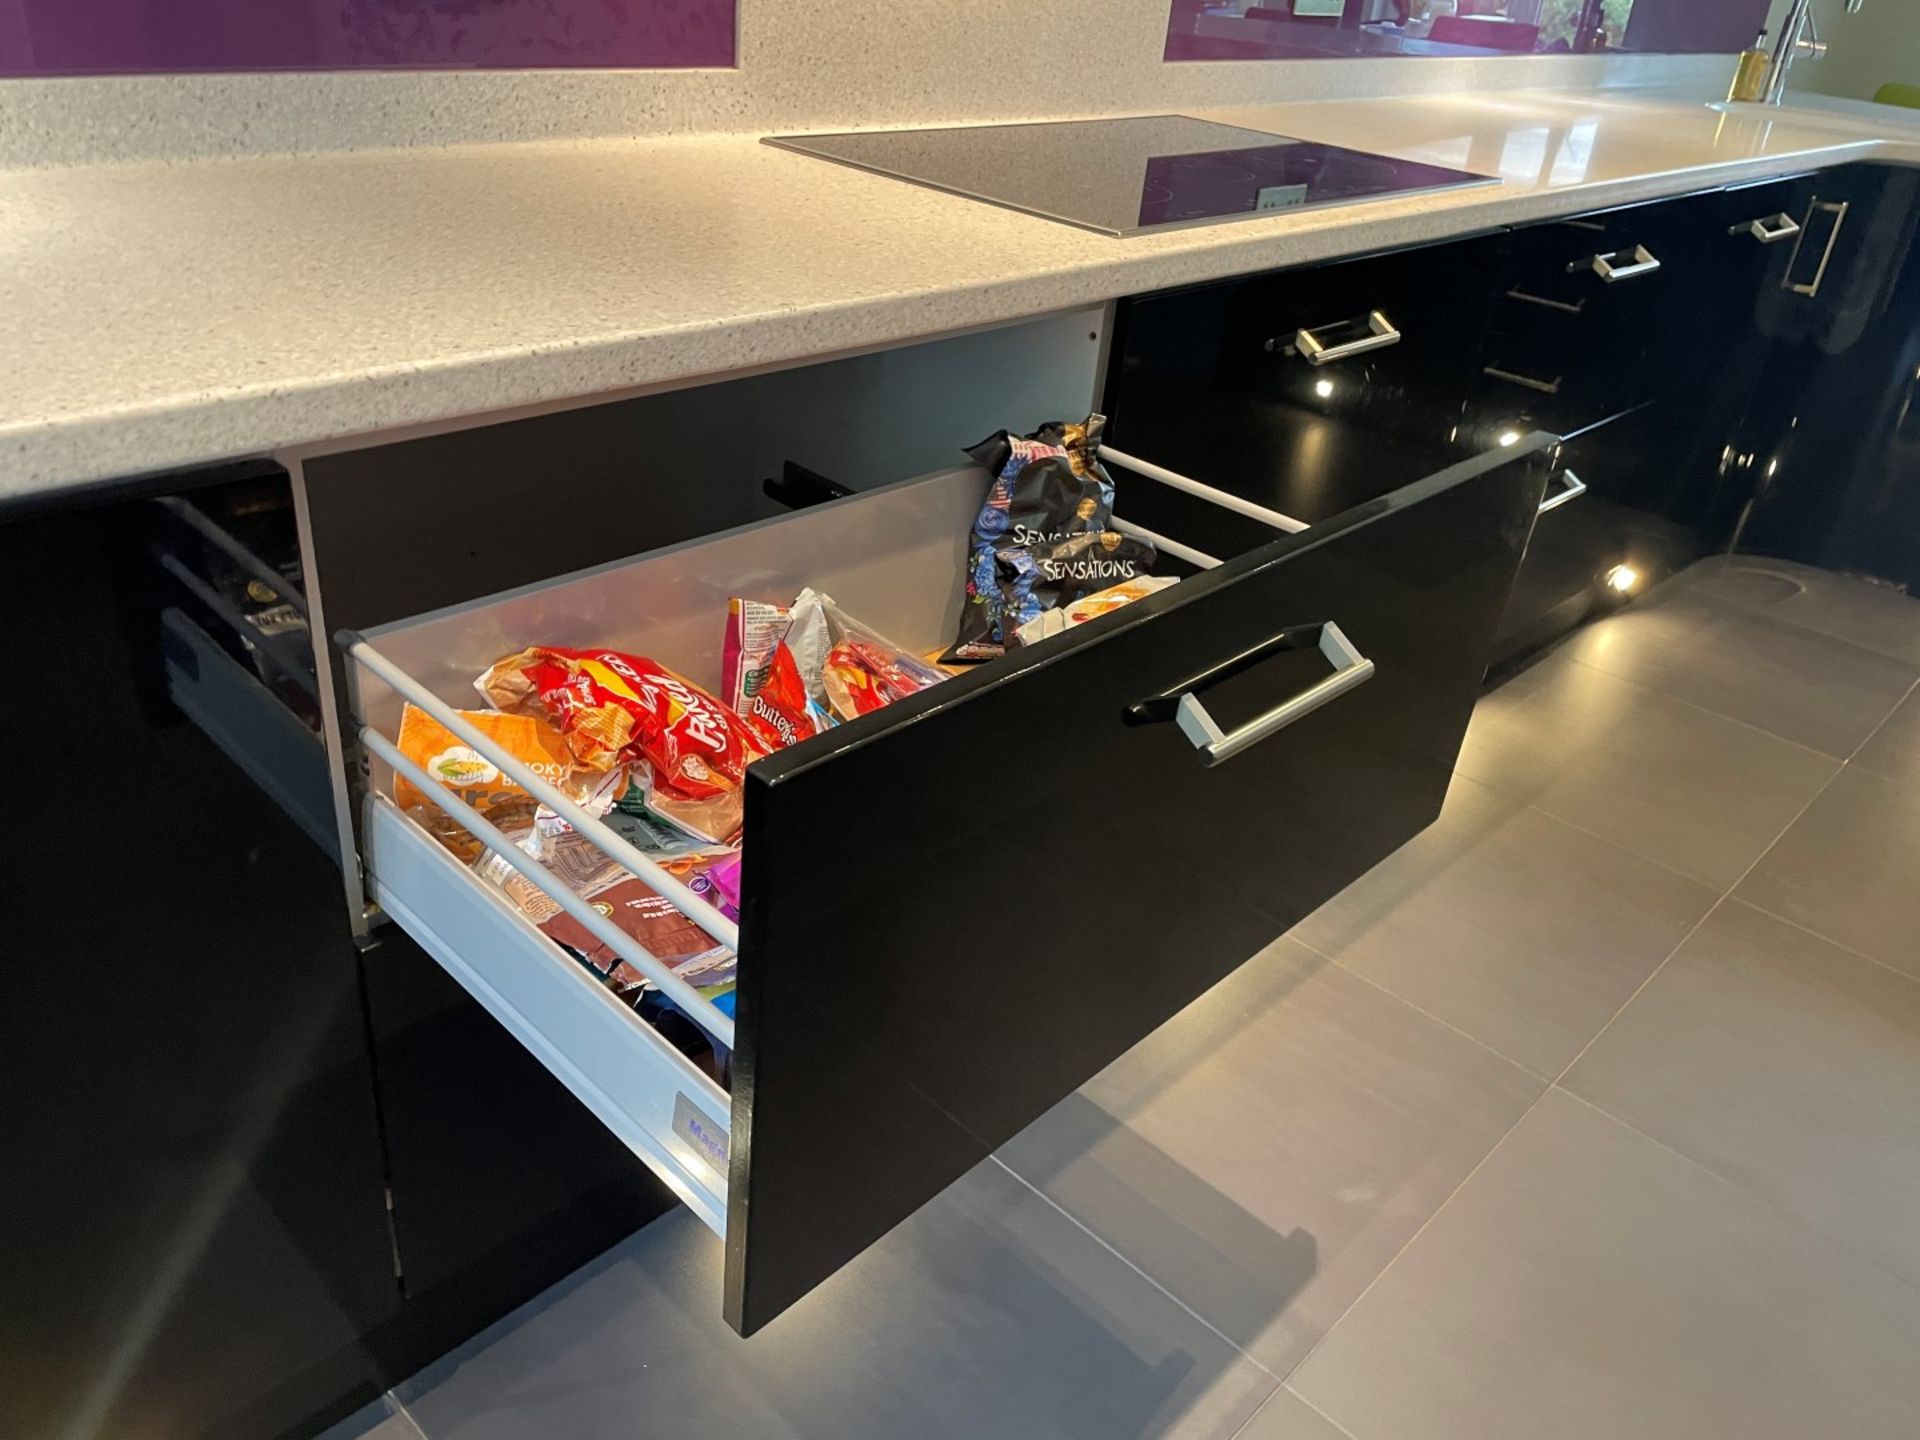 1 x MAGNET Modern Black Gloss Fitted Kitchen With Premium Branded Appliances + Corian Worktops - Image 31 of 62